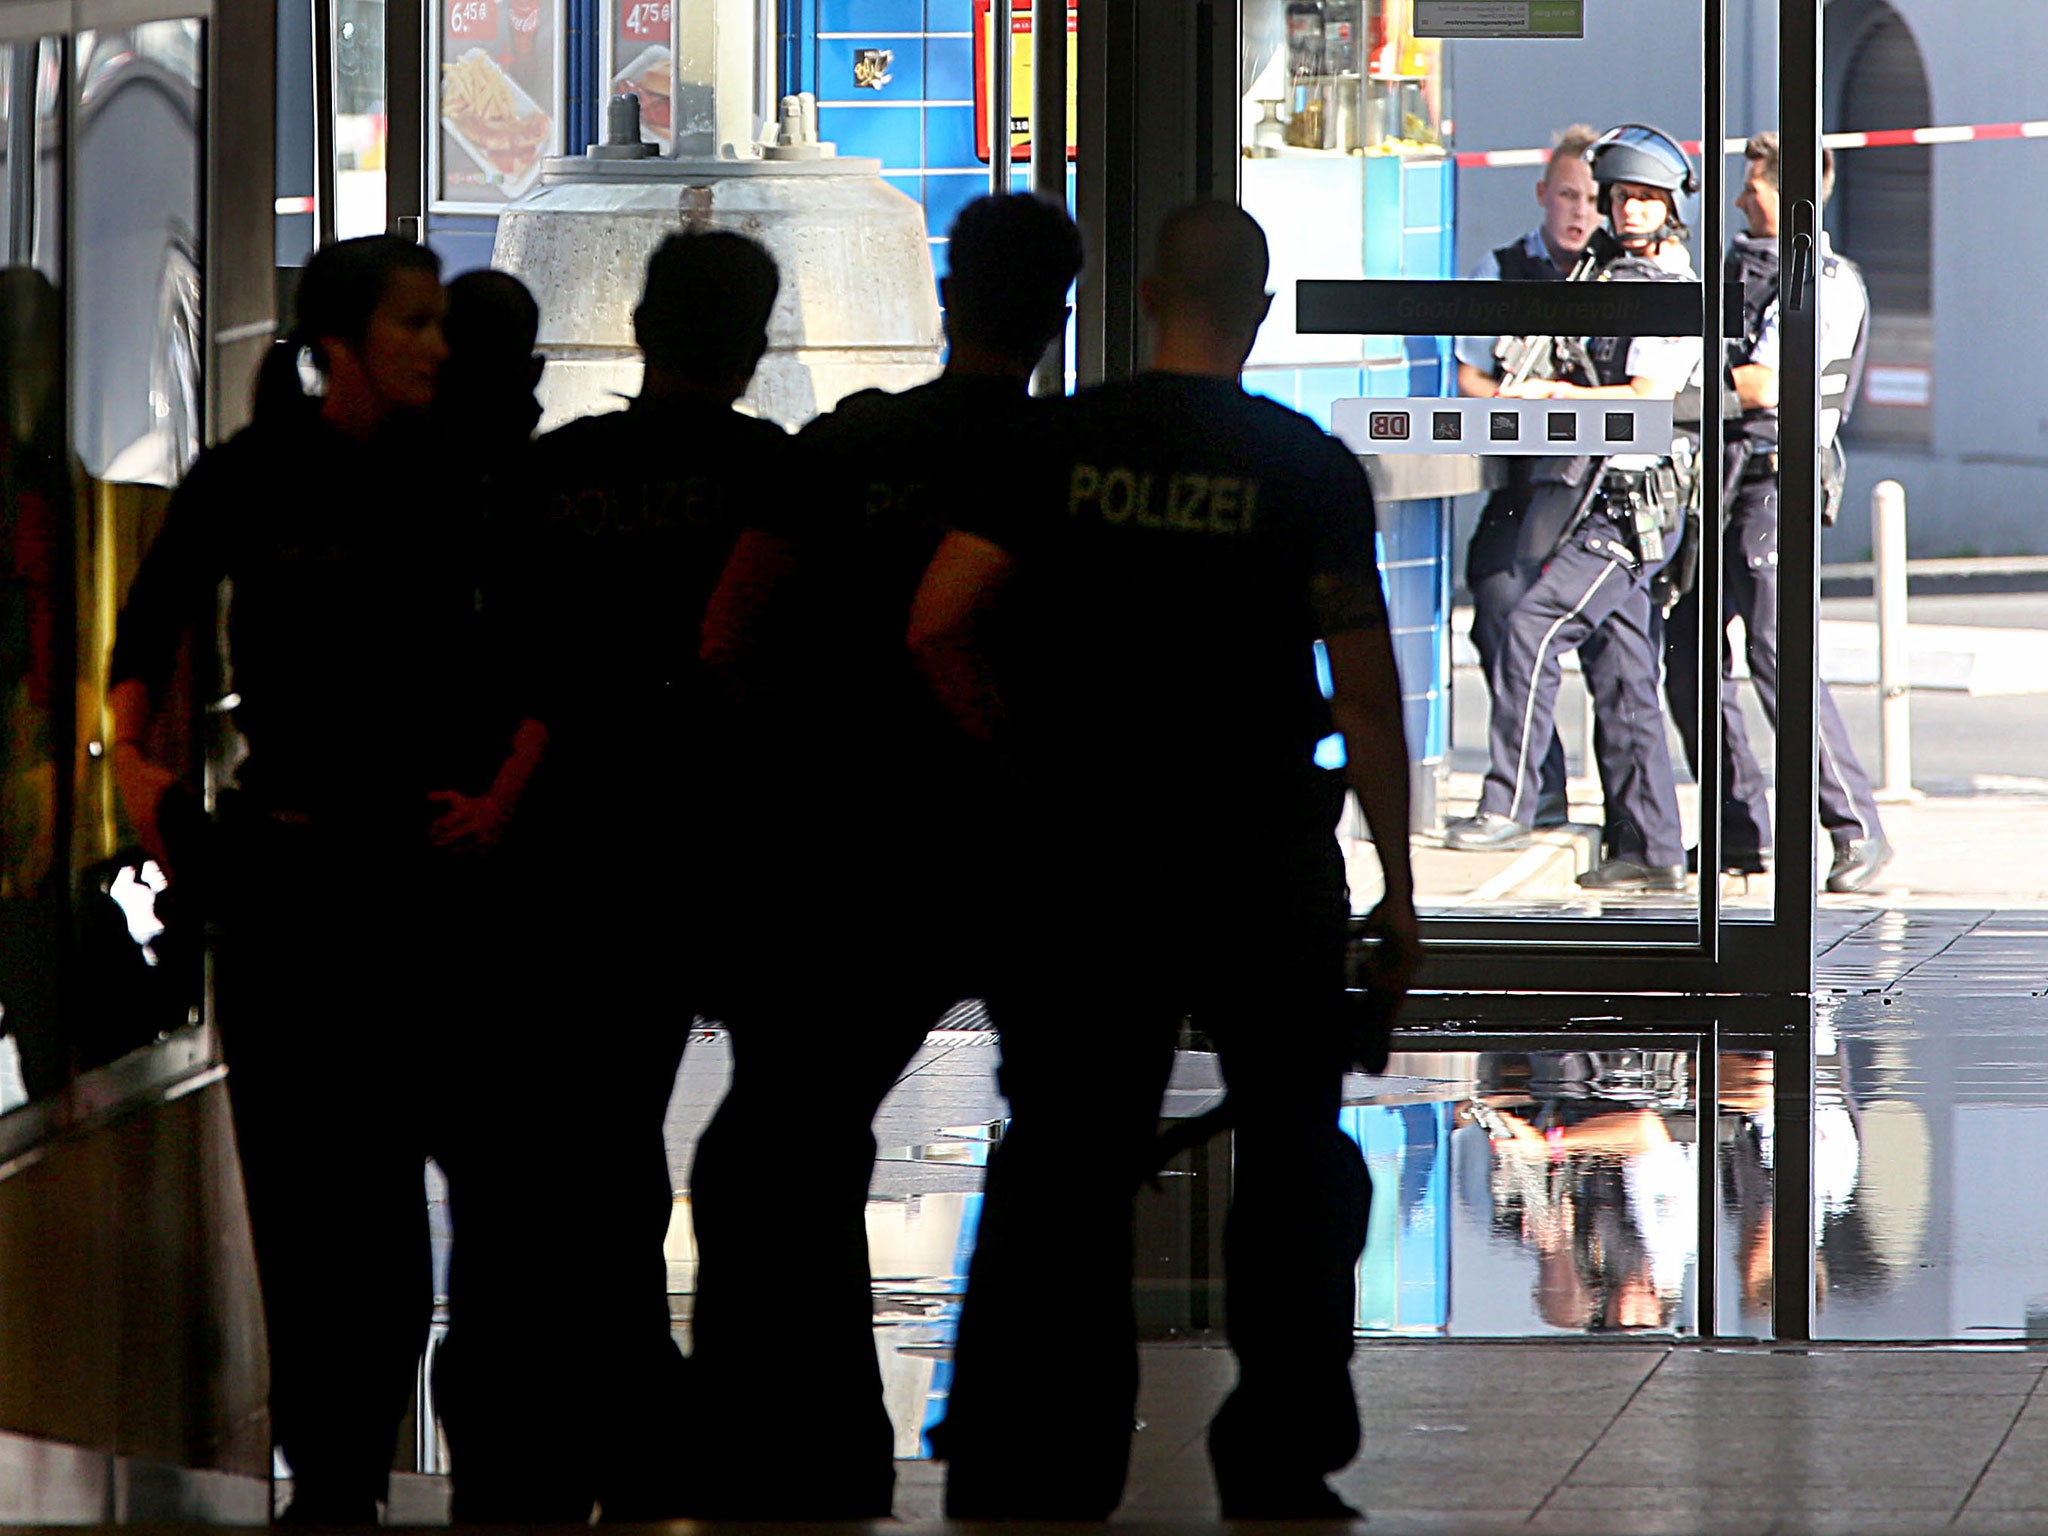 Police officers at Cologne railway station in Germany during a hostage situation on 15 October